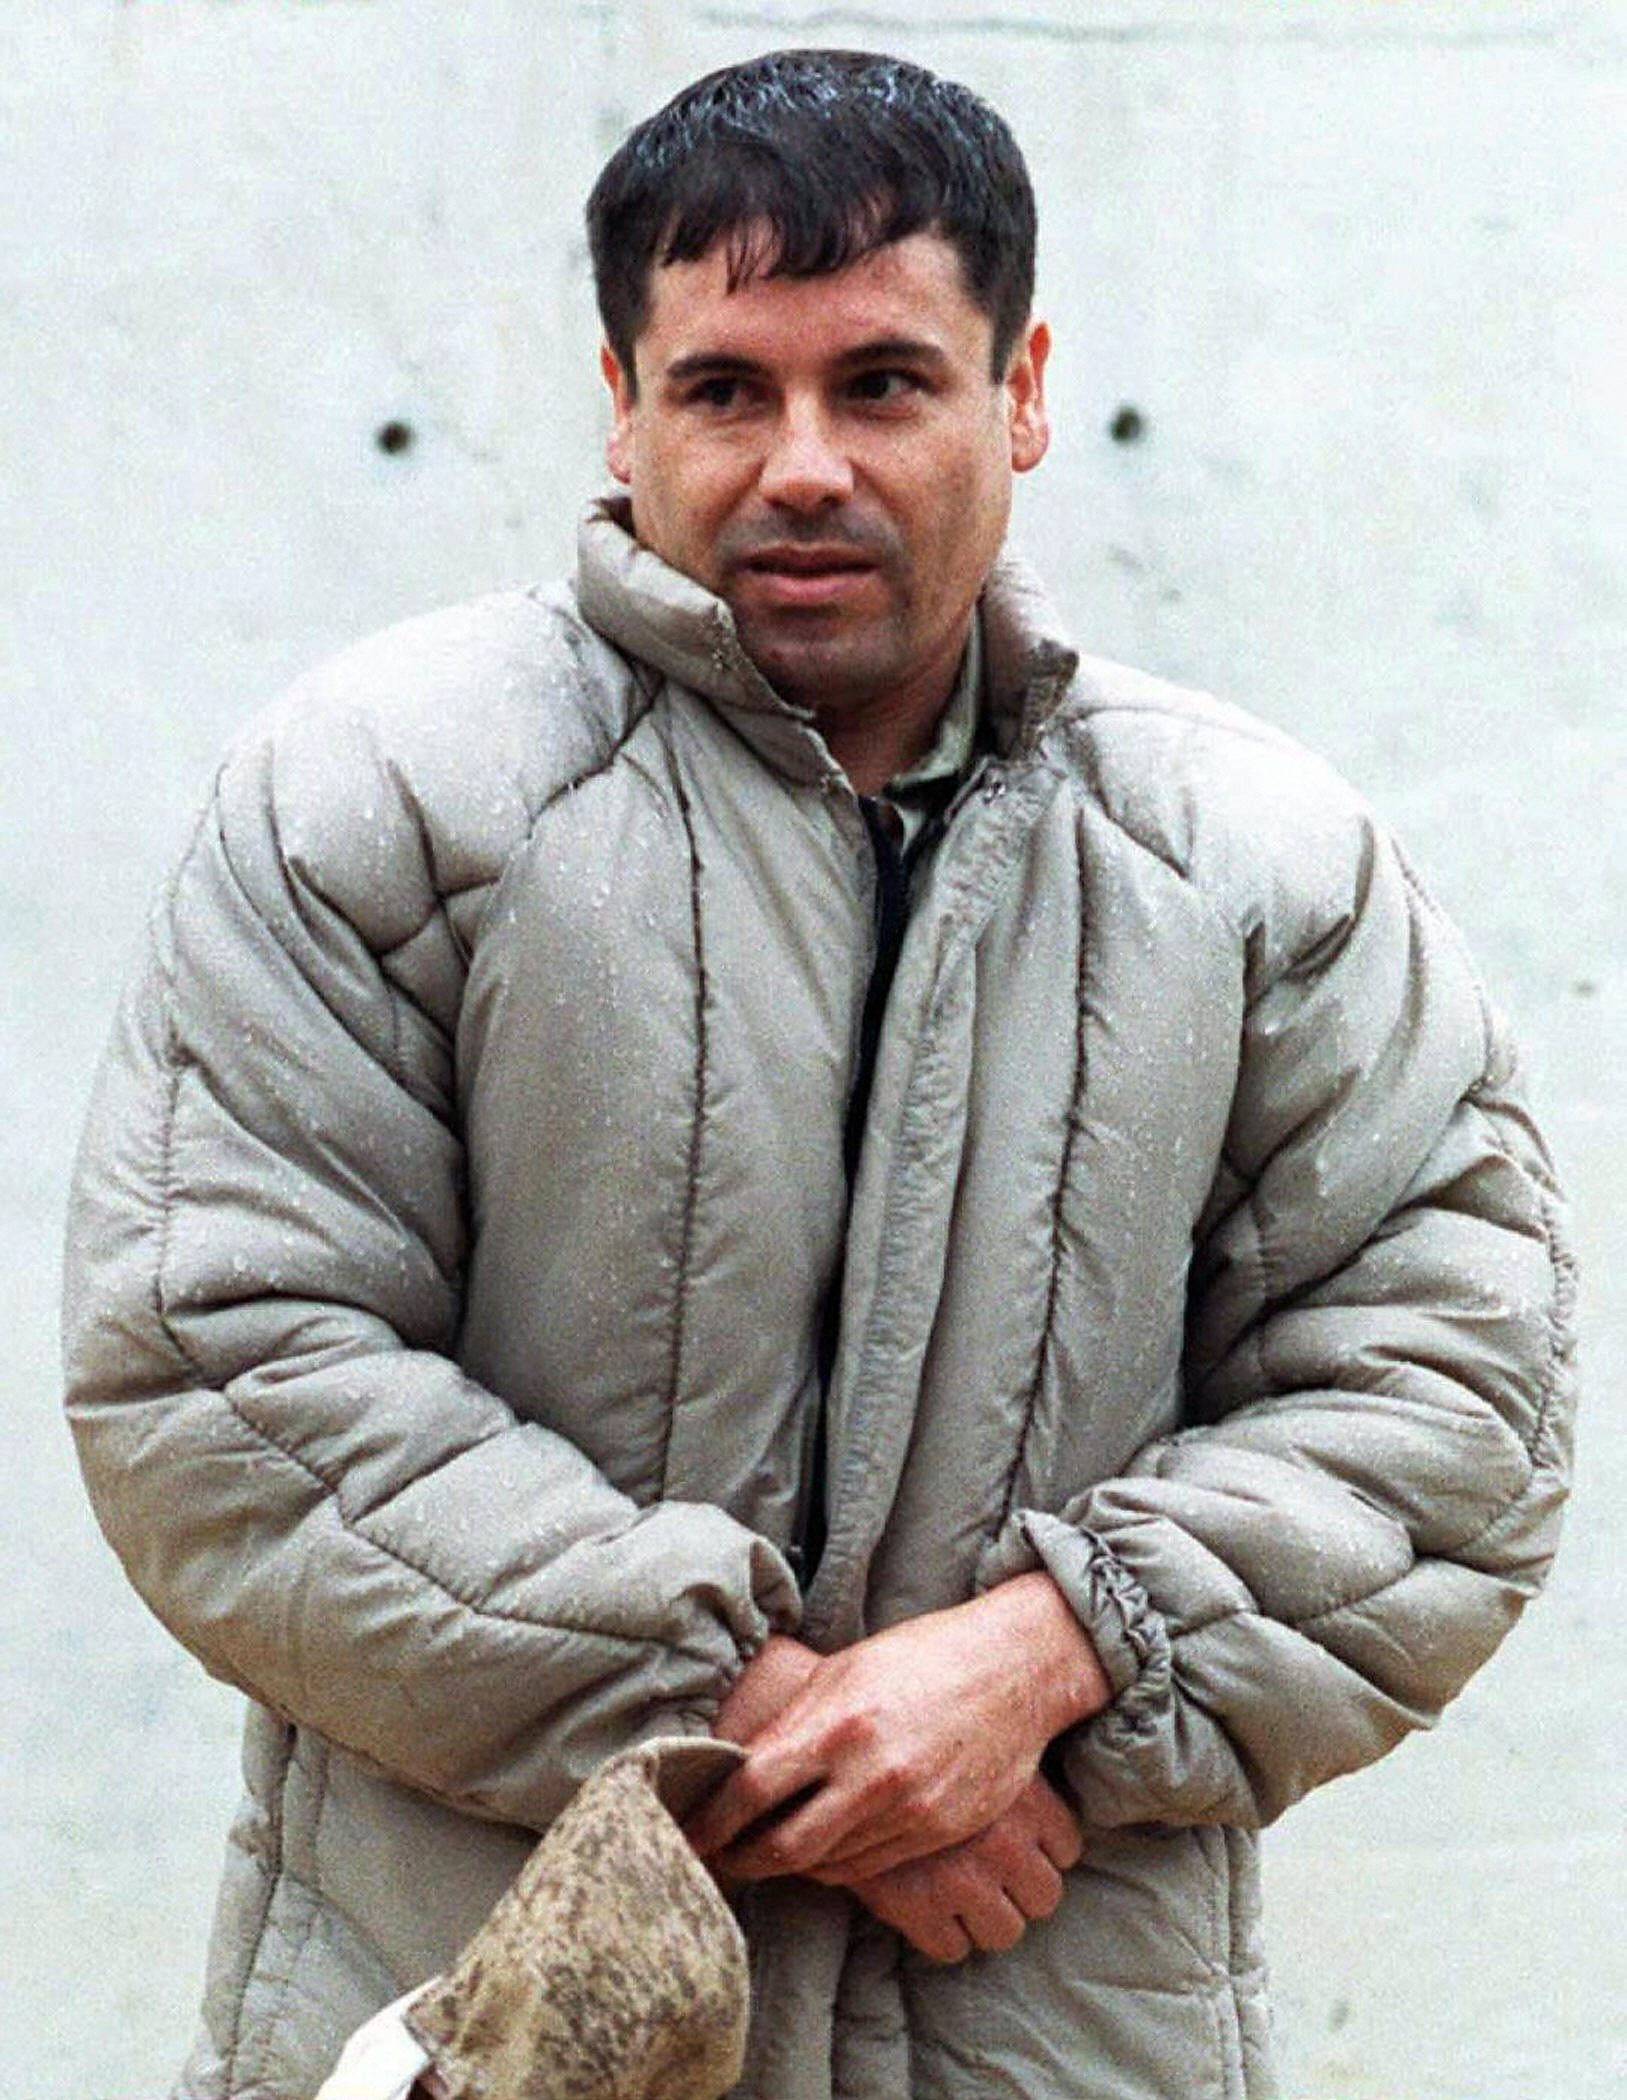 Who is El Chapo? Joaquin Guzman: the drug lord behind the 